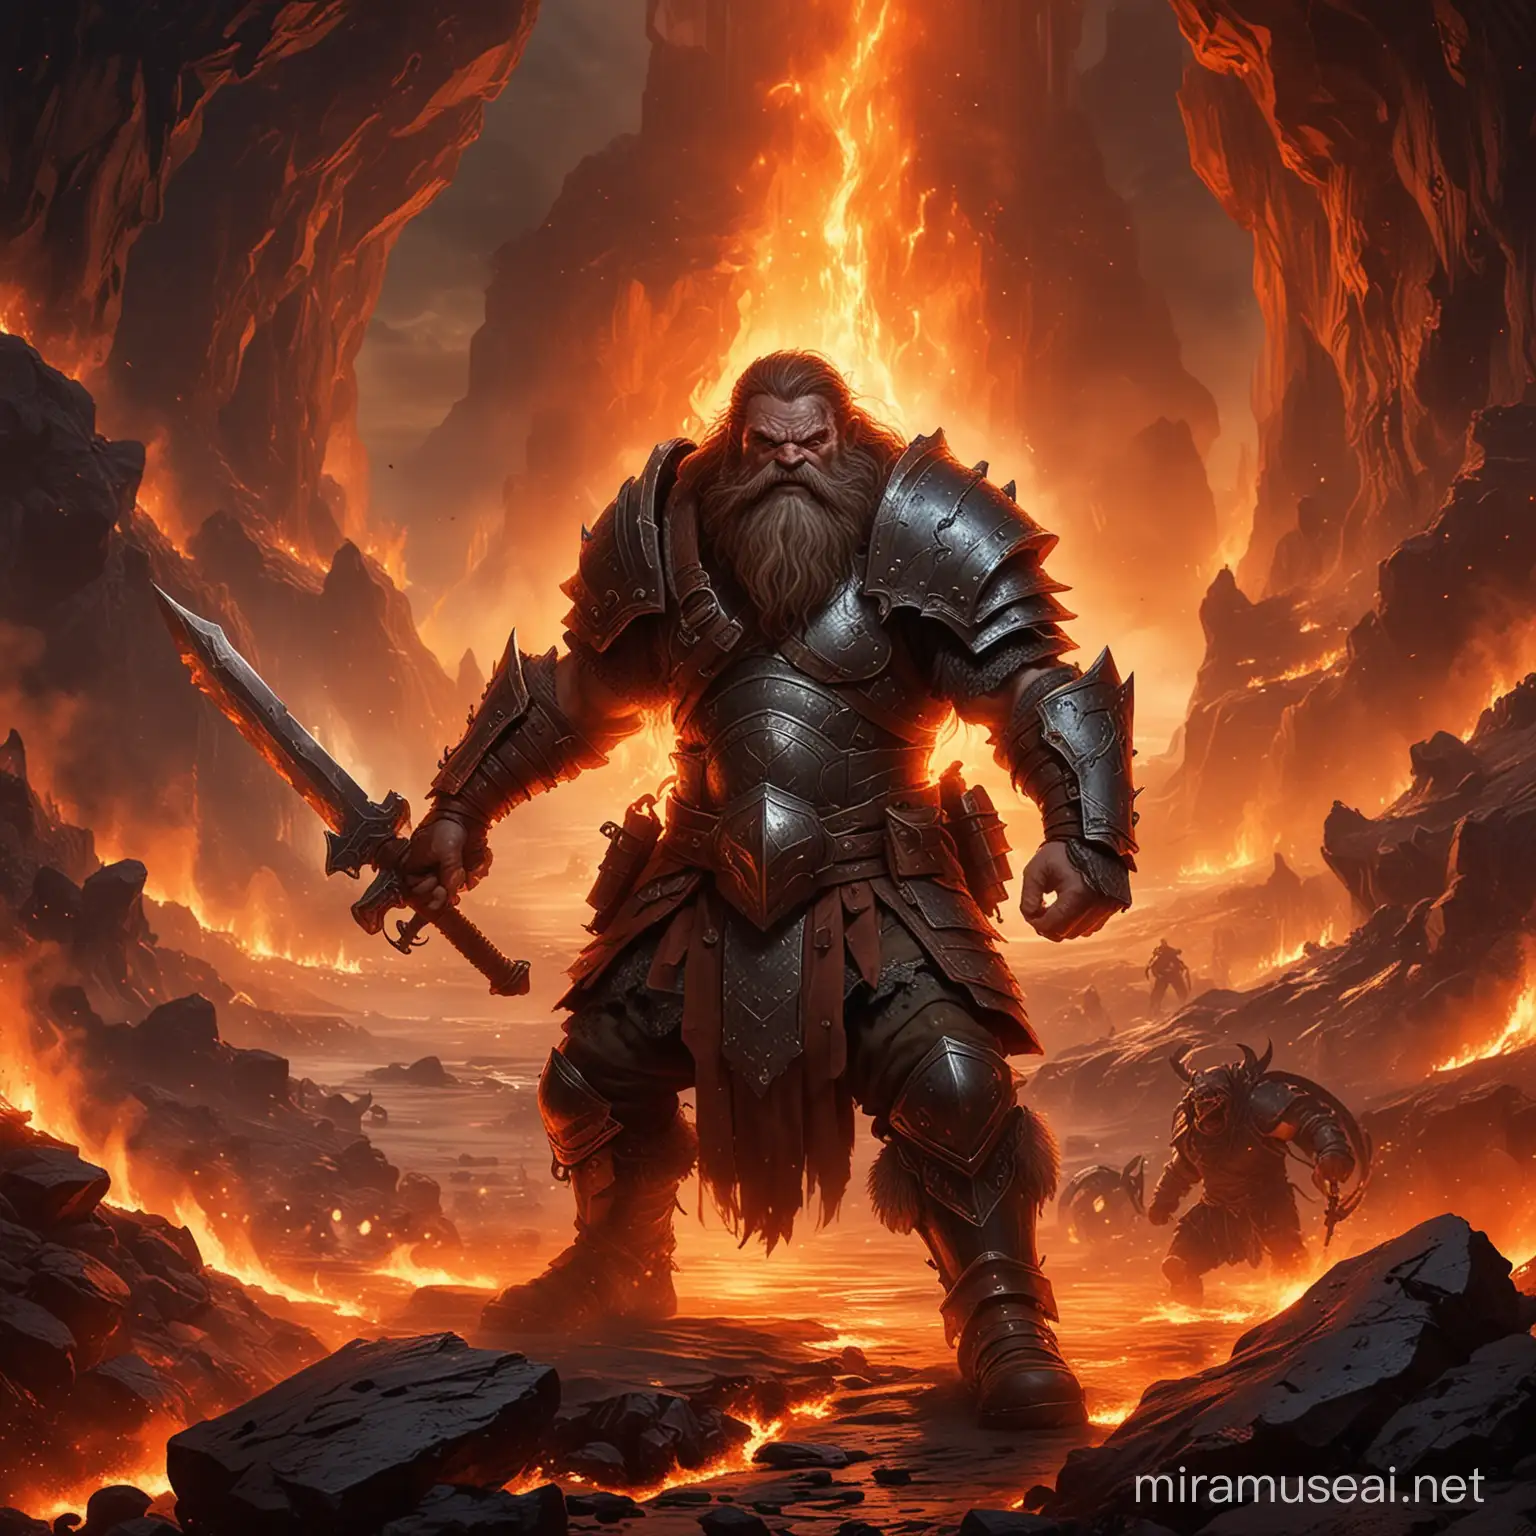 "Describe a scene featuring a rugged dwarf fighter clad in formidable armor, battling fiercely against a backdrop of roaring flames and billowing smoke in a treacherous, lava-filled cavern. Convey the sheer determination etched on the warrior's face as they wield their trusty weapon, the clang of metal against metal echoing amidst the chaos, while the glow of molten lava casts an ominous glow upon the harrowing battlefield."